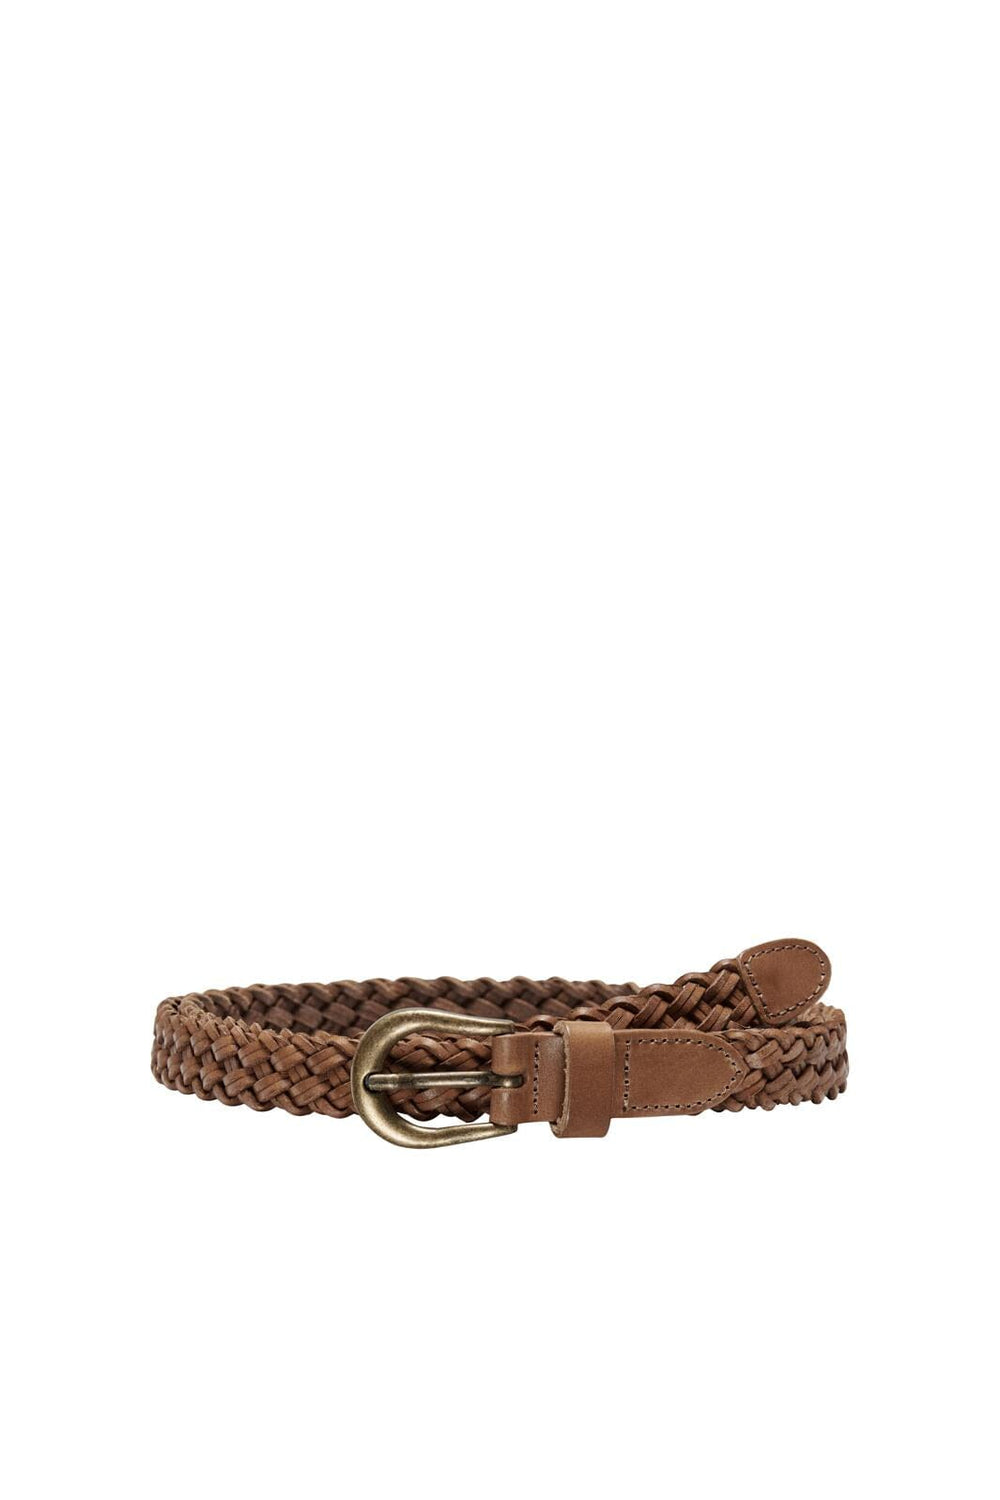 Only - Onlhanna Braided Leather Jeans Belt - 4130197 Cognac Antique Brass Metal